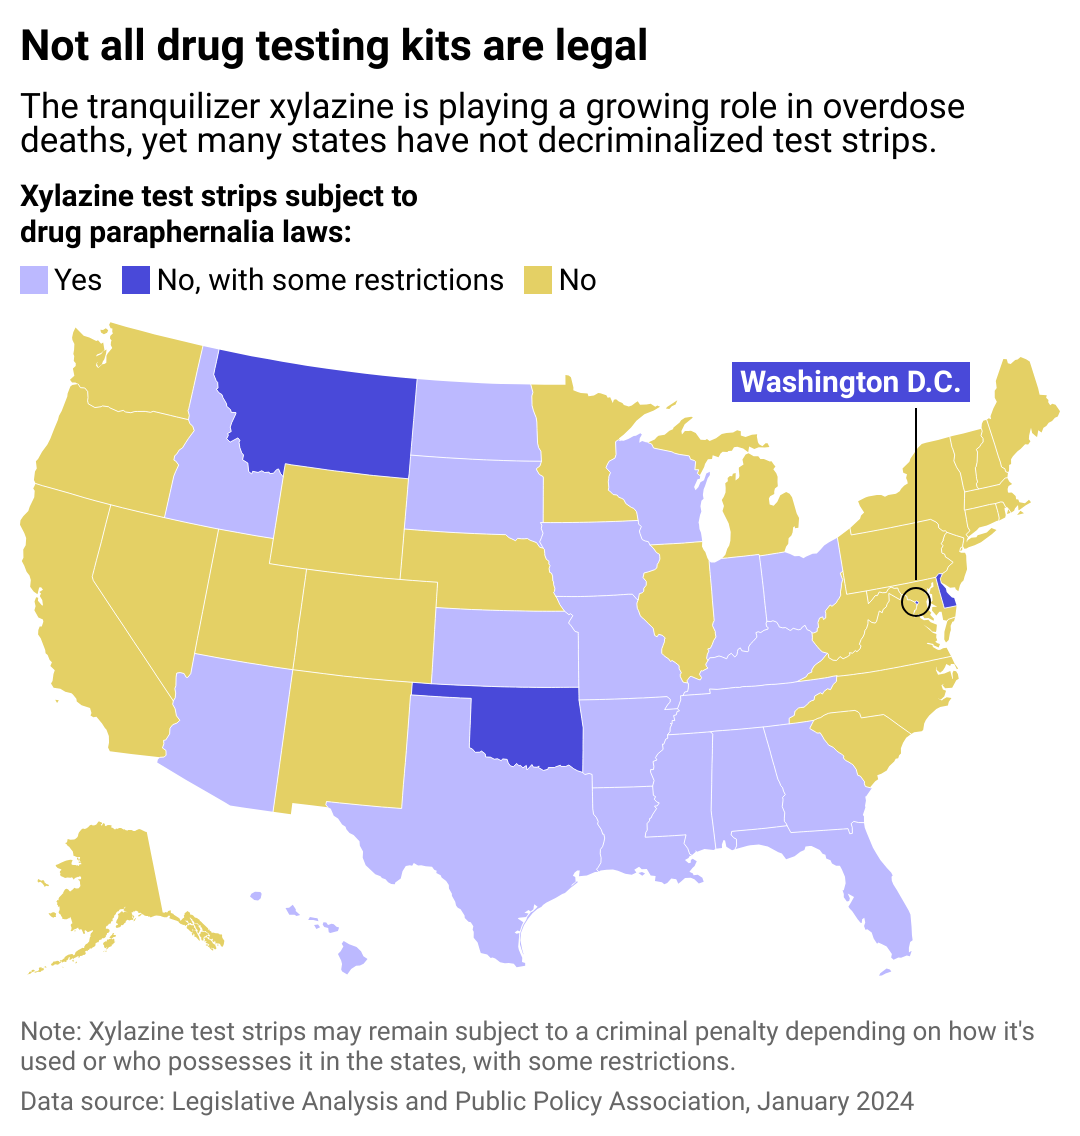 Map showing the 20 states where xylazine testing remains illegal.